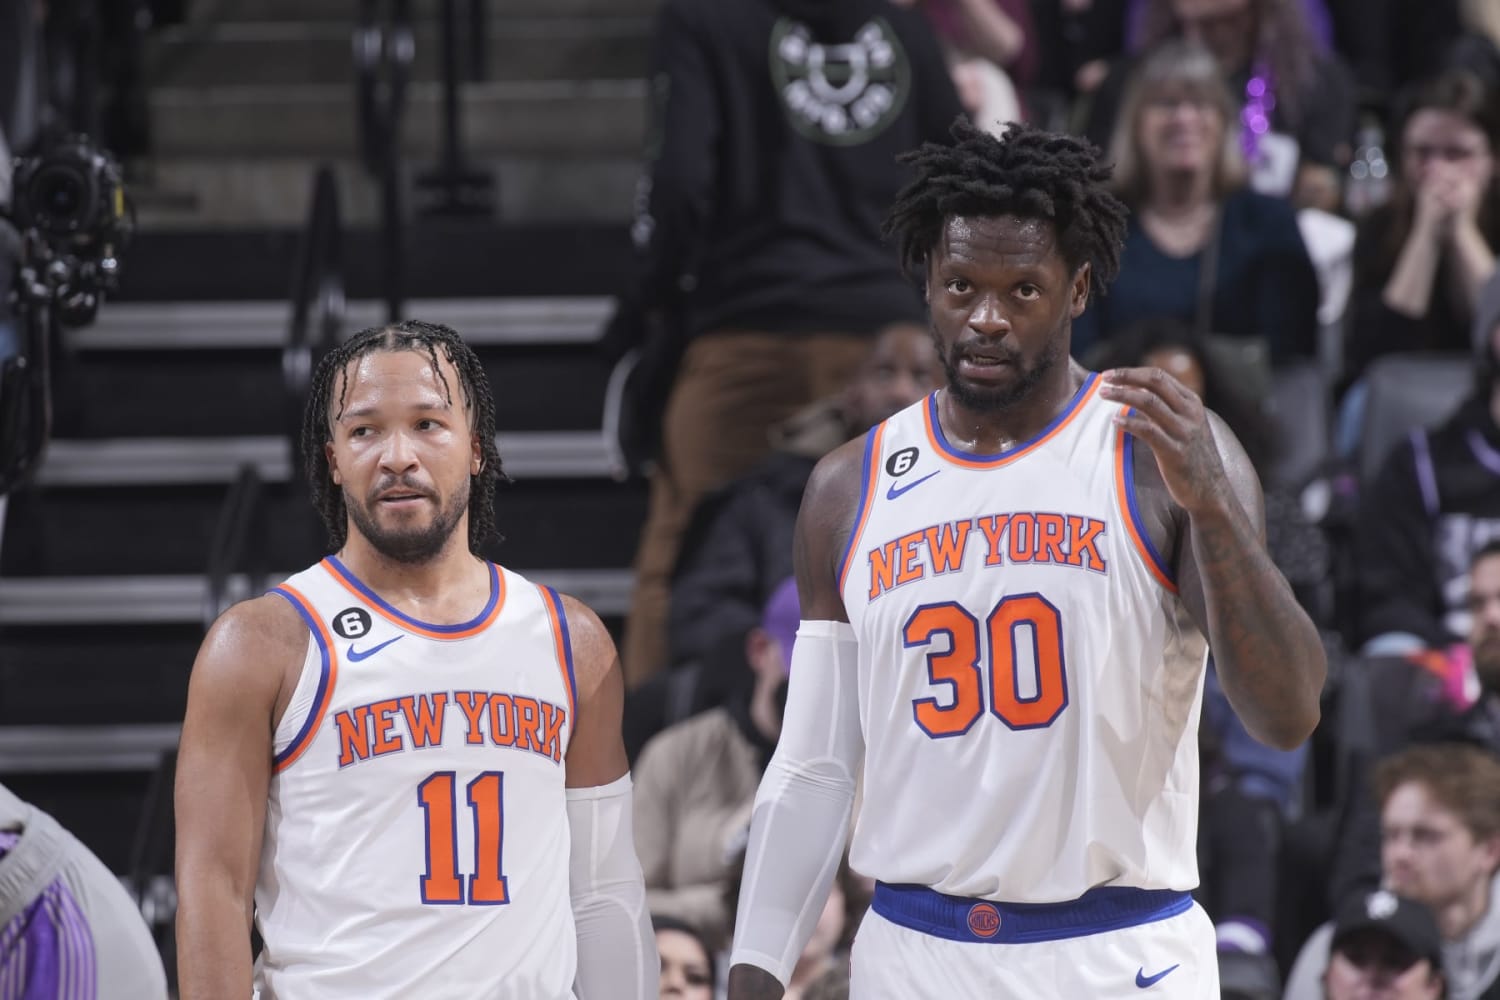 Suns eyeing Derrick Rose amid potential buyout from Knicks